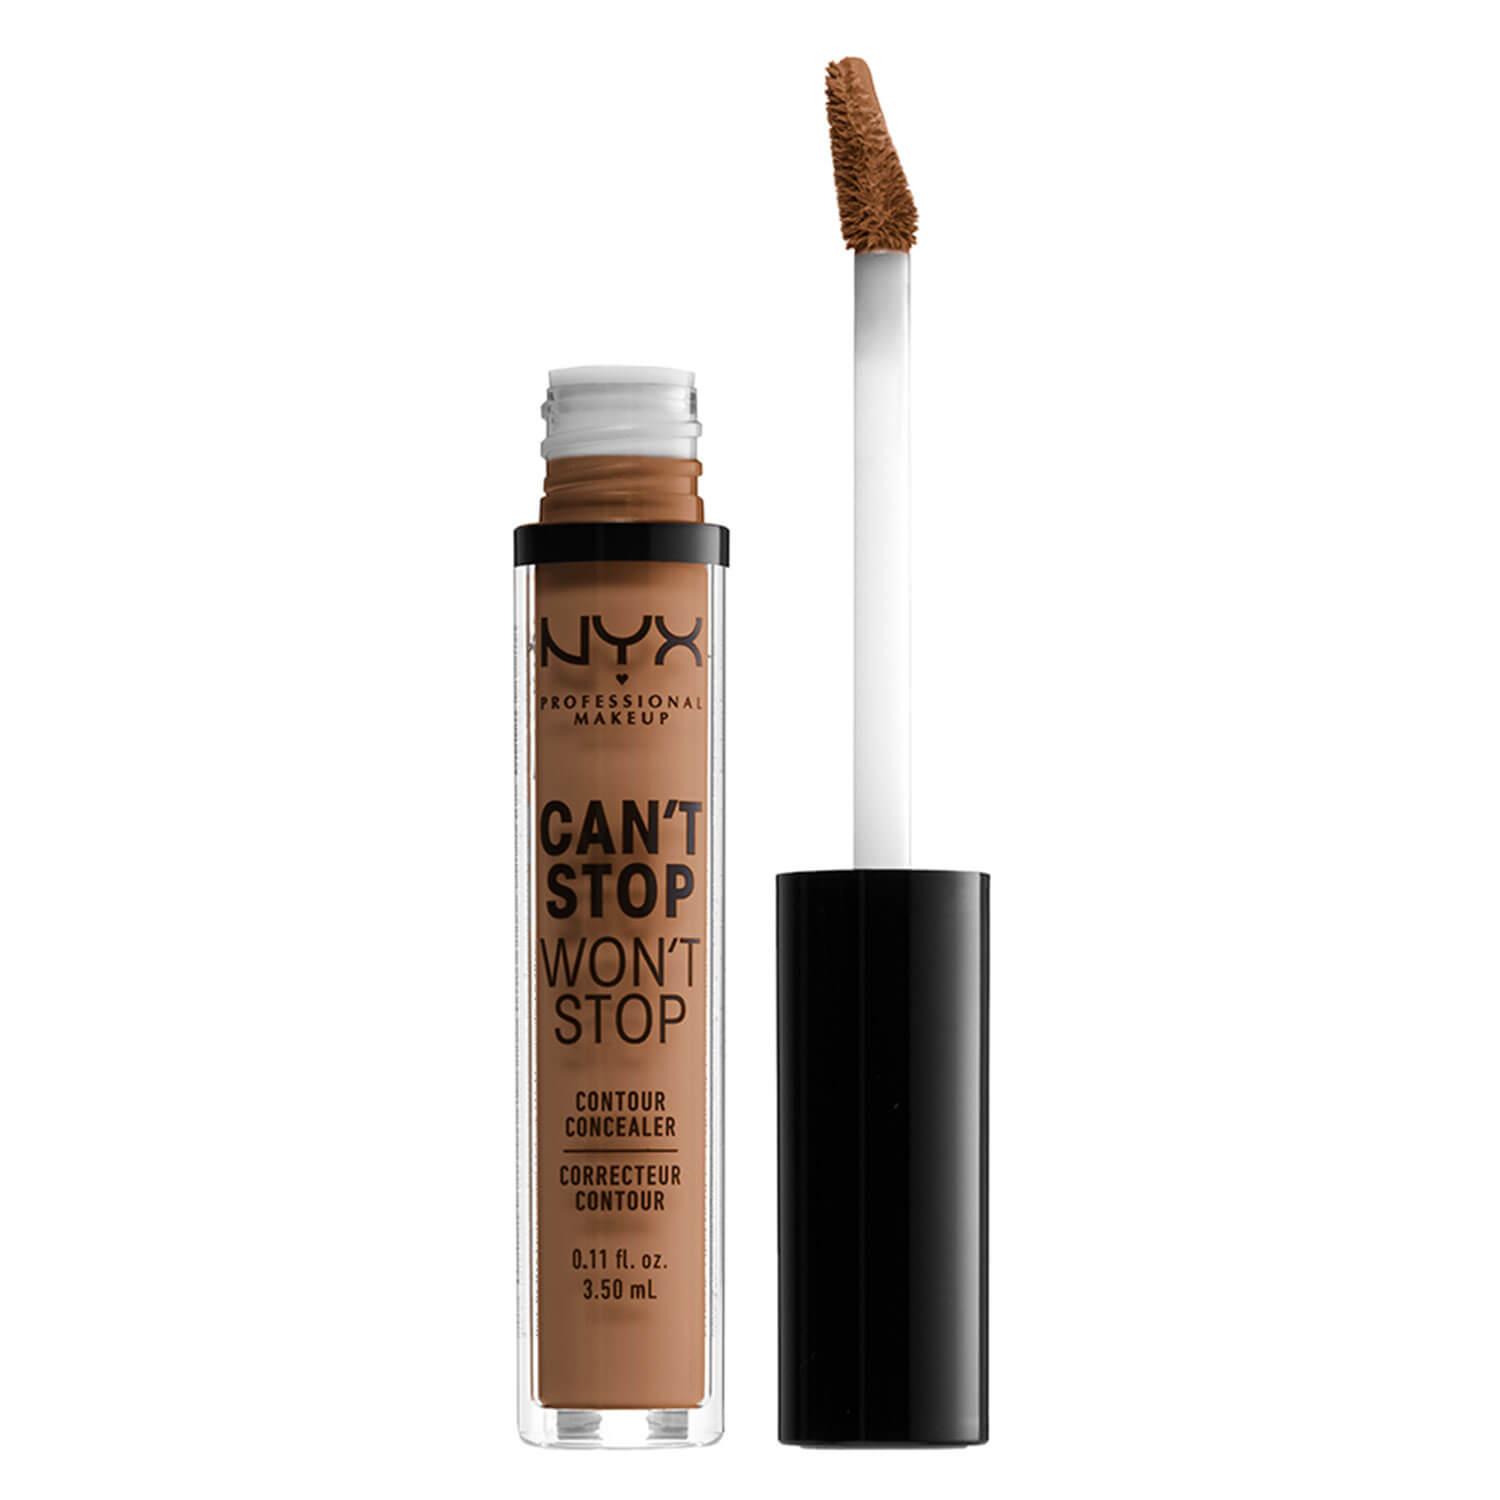 Can't Stop Won't Stop - Contour Concealer Mahogany